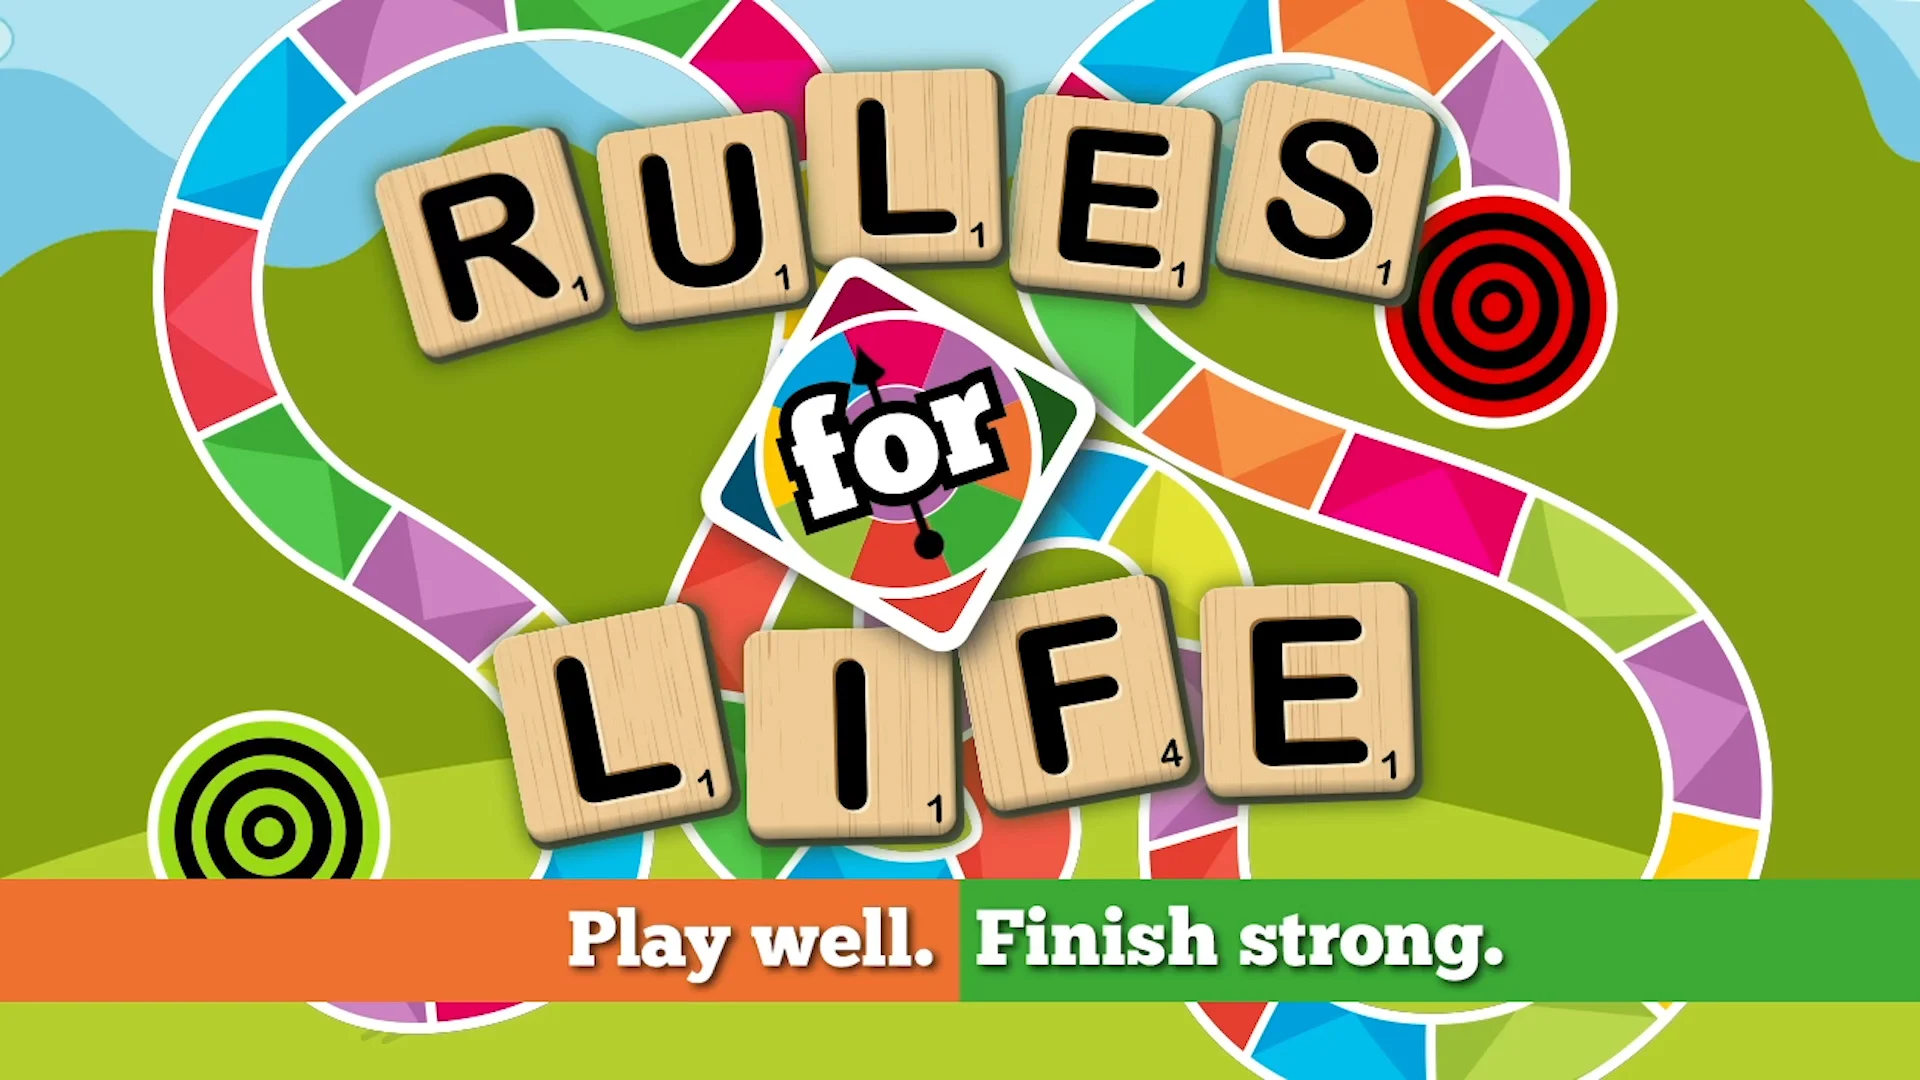 How To Play Life, Game Rules